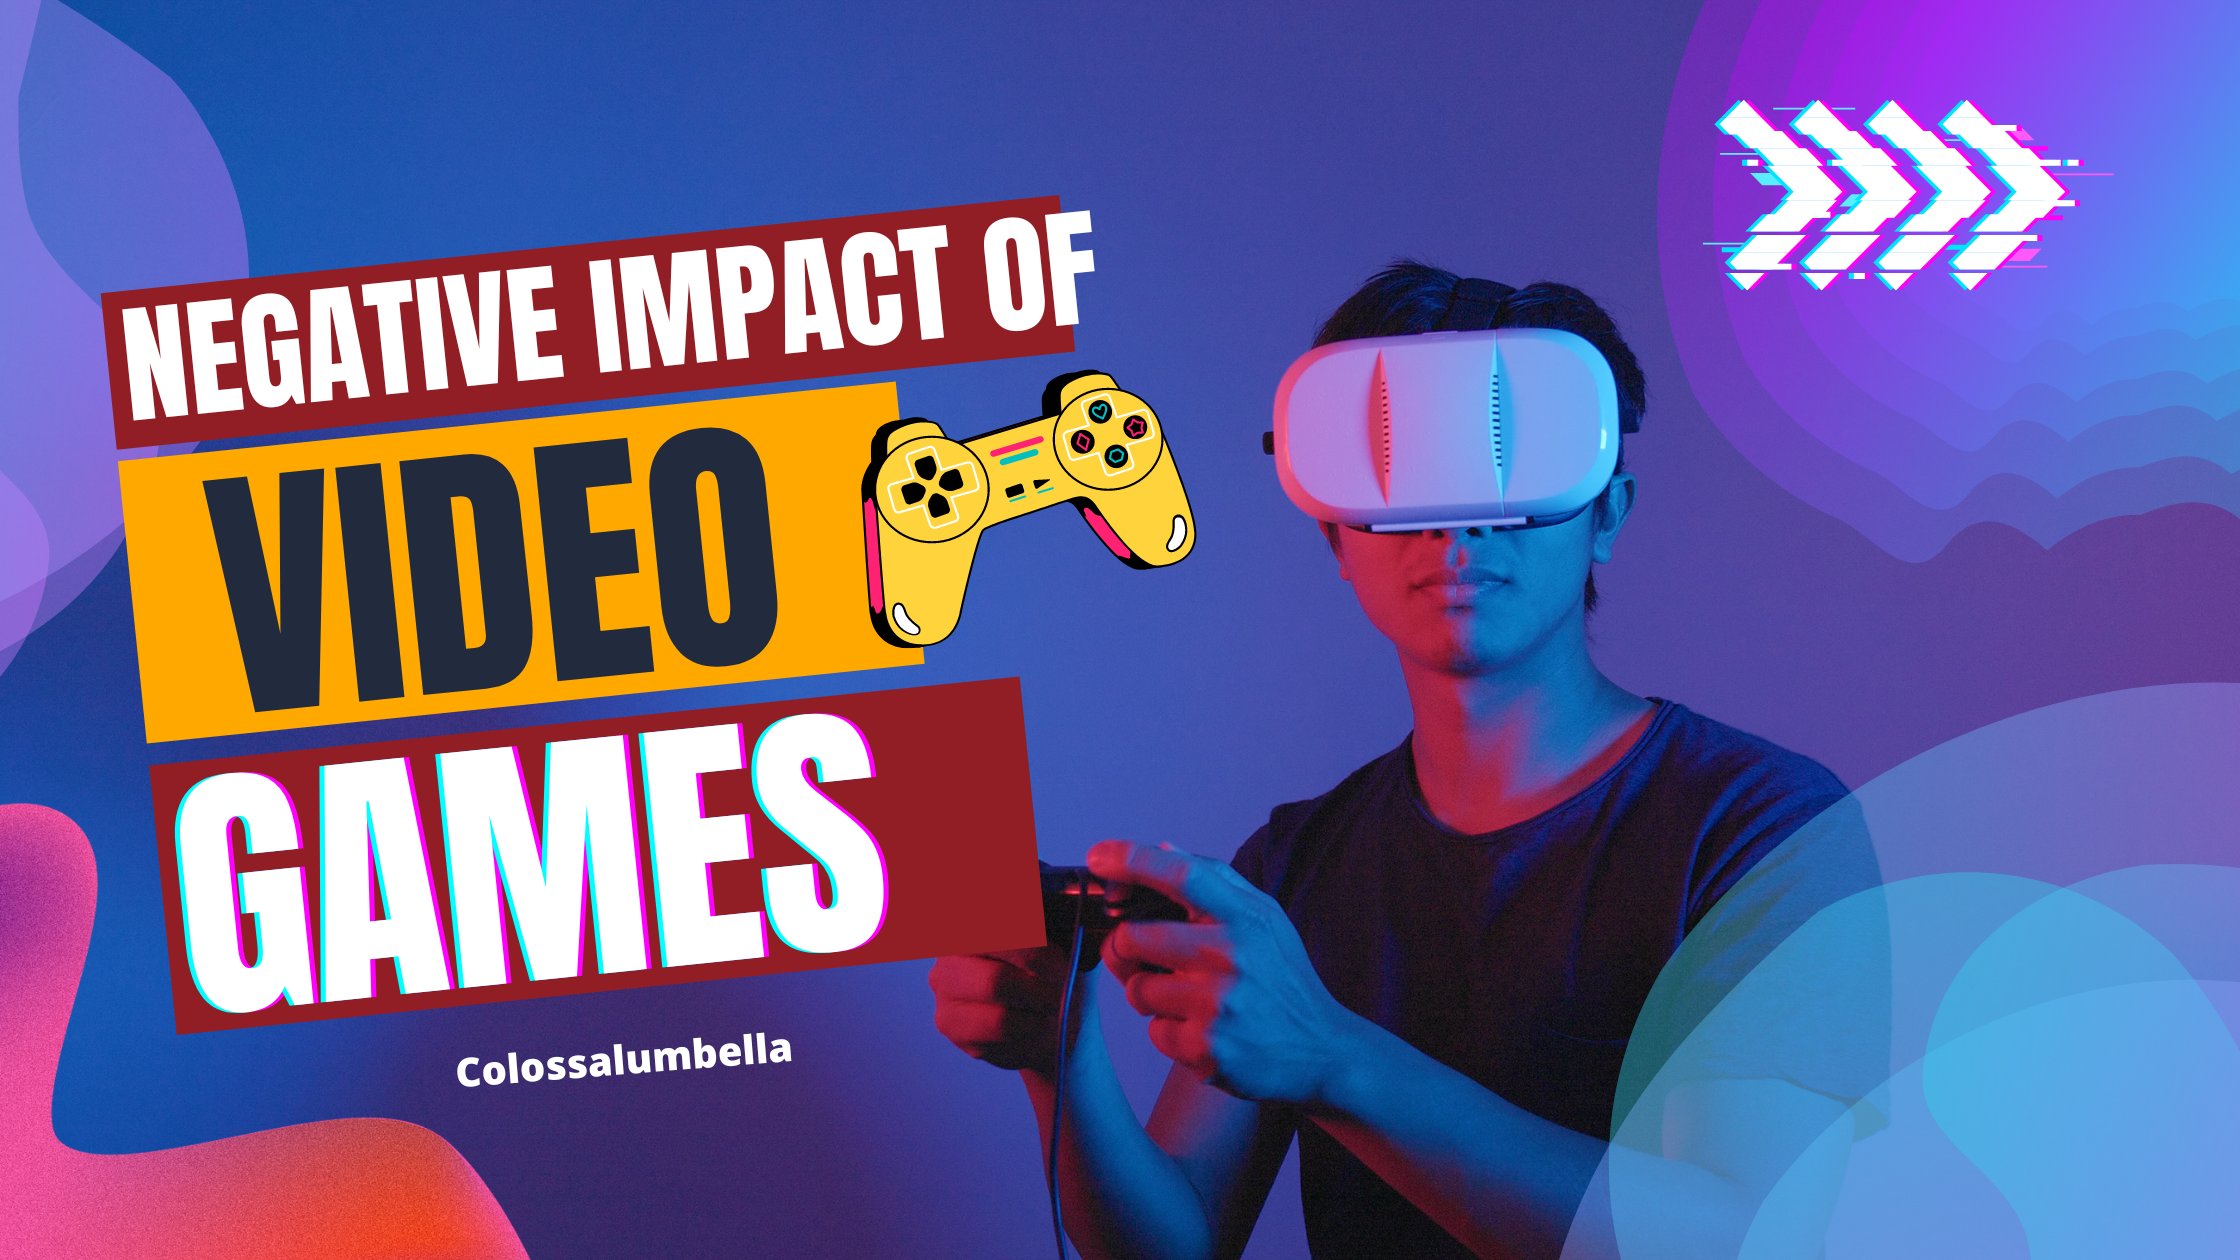 10 Negative Impact of Video Games